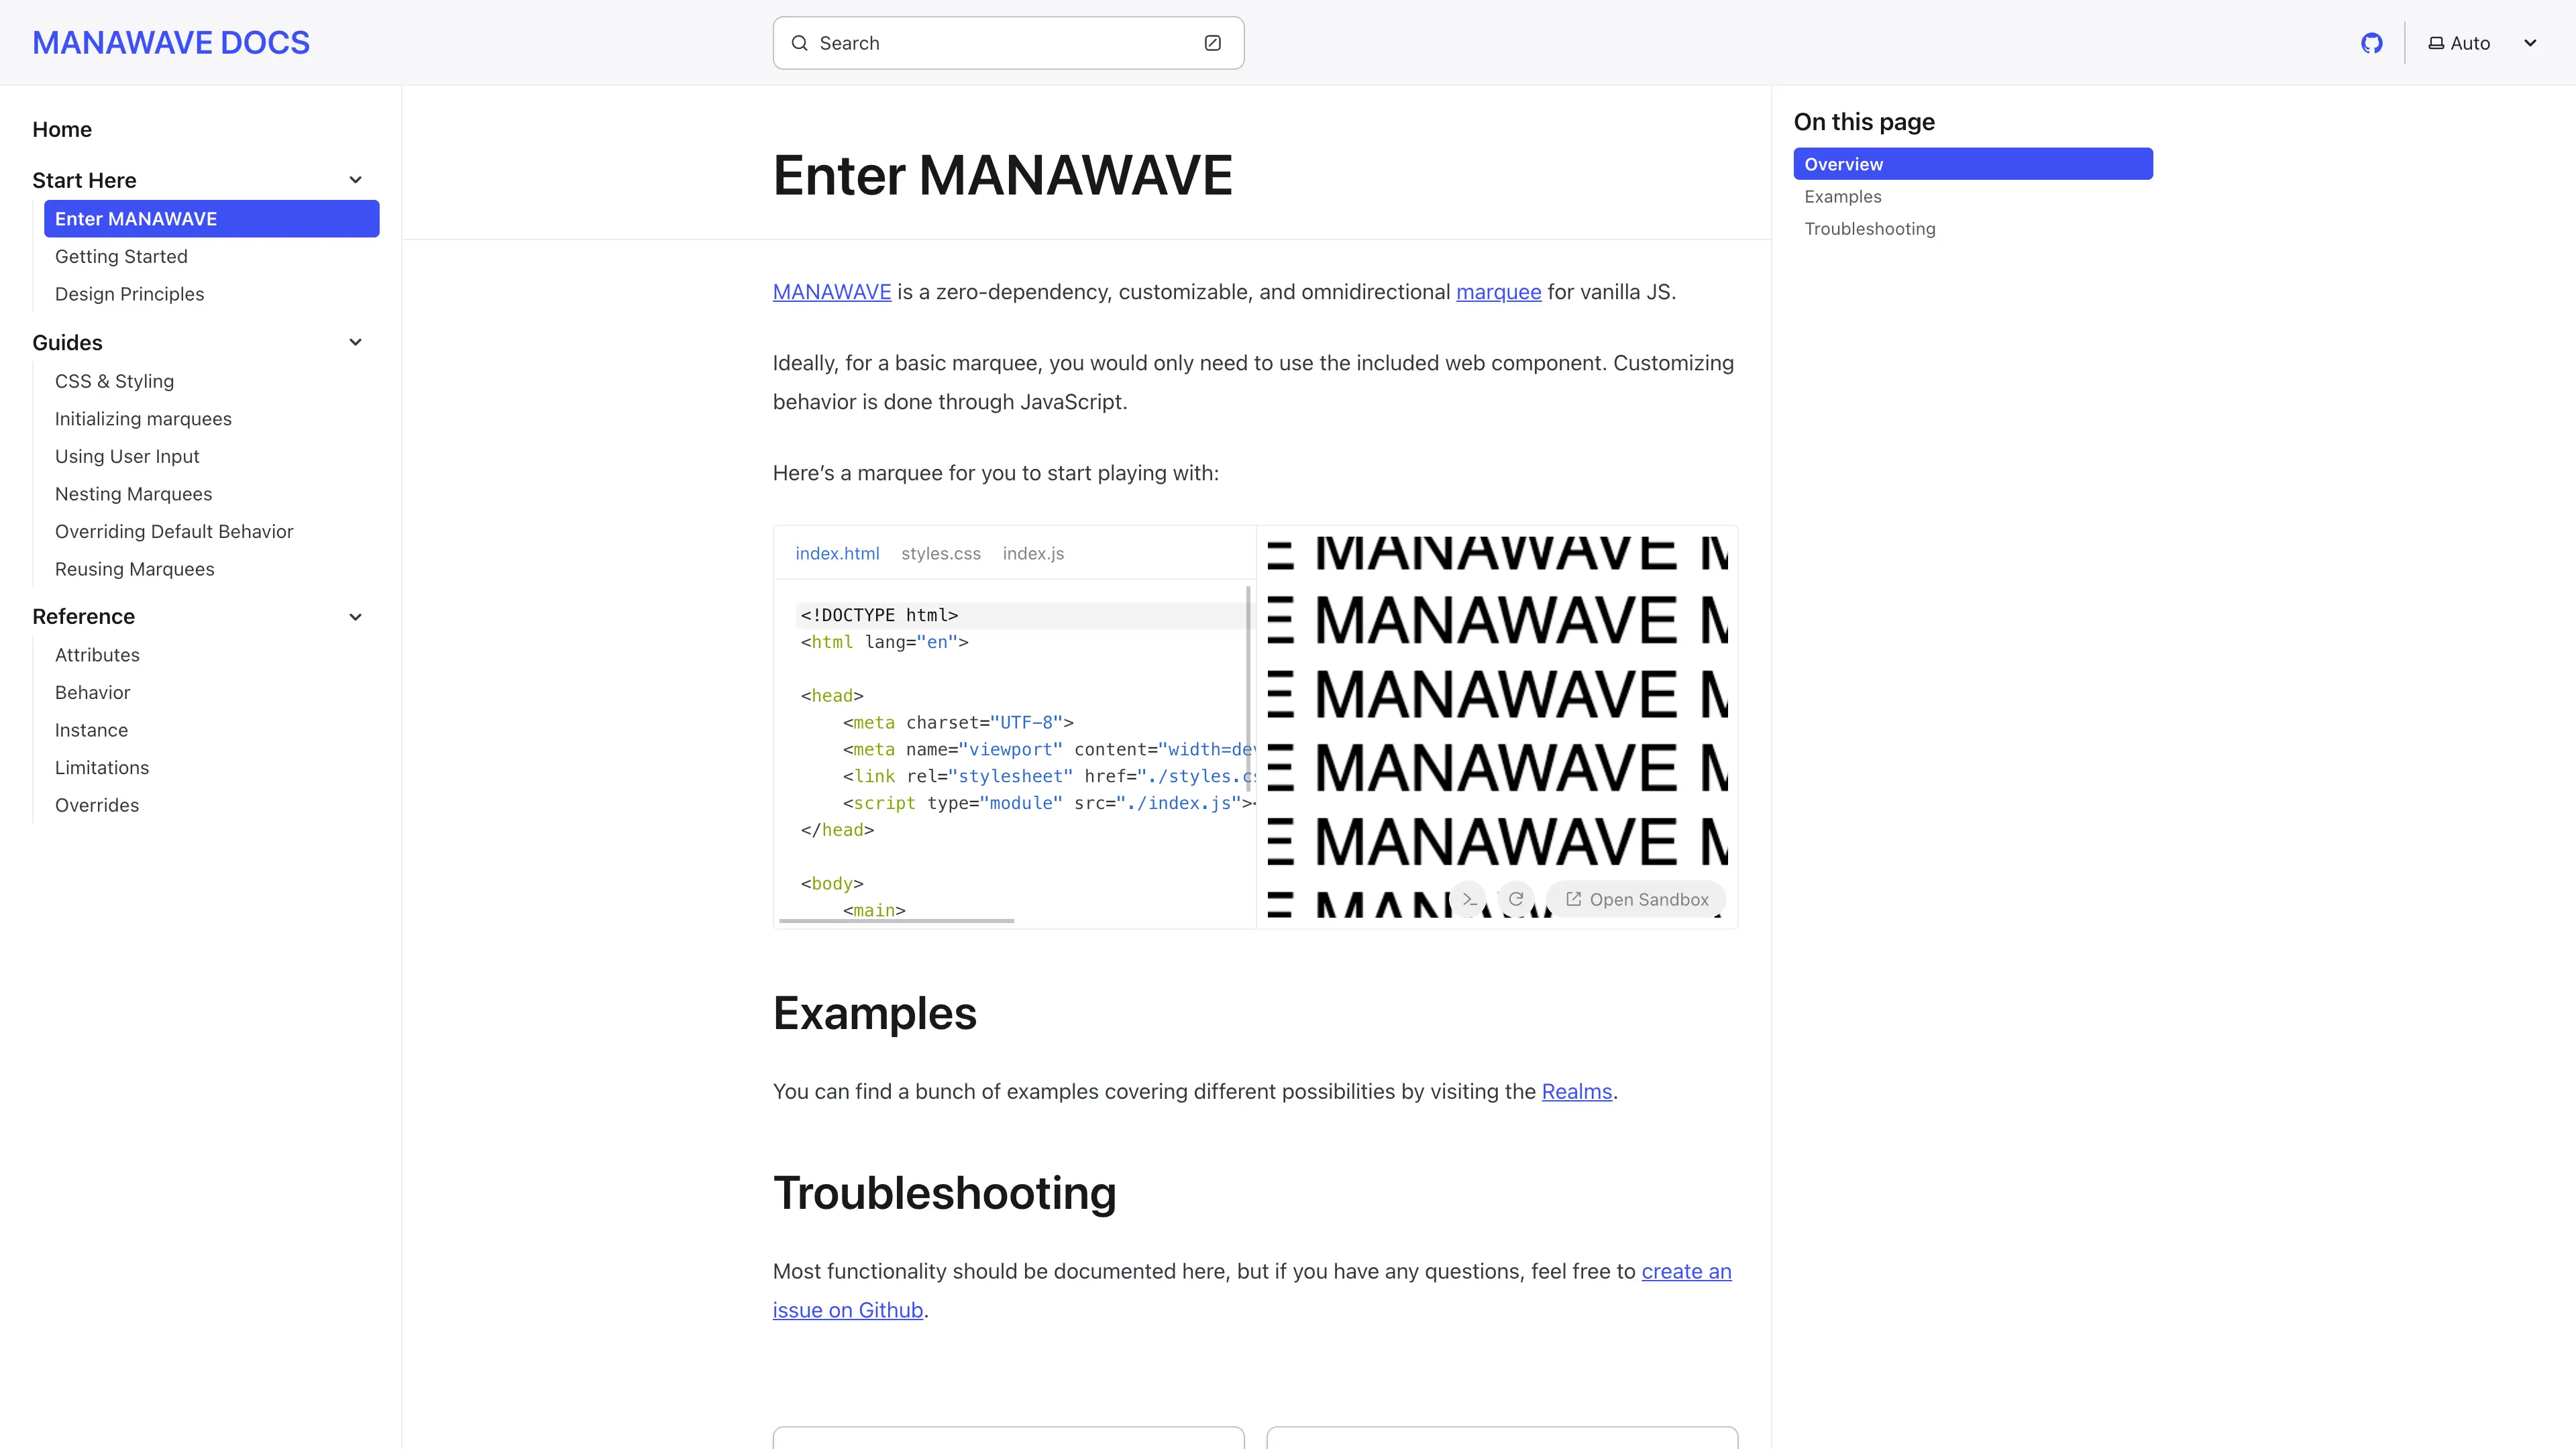 MANAWAVE documentation site showing a quick start and code playground to get started